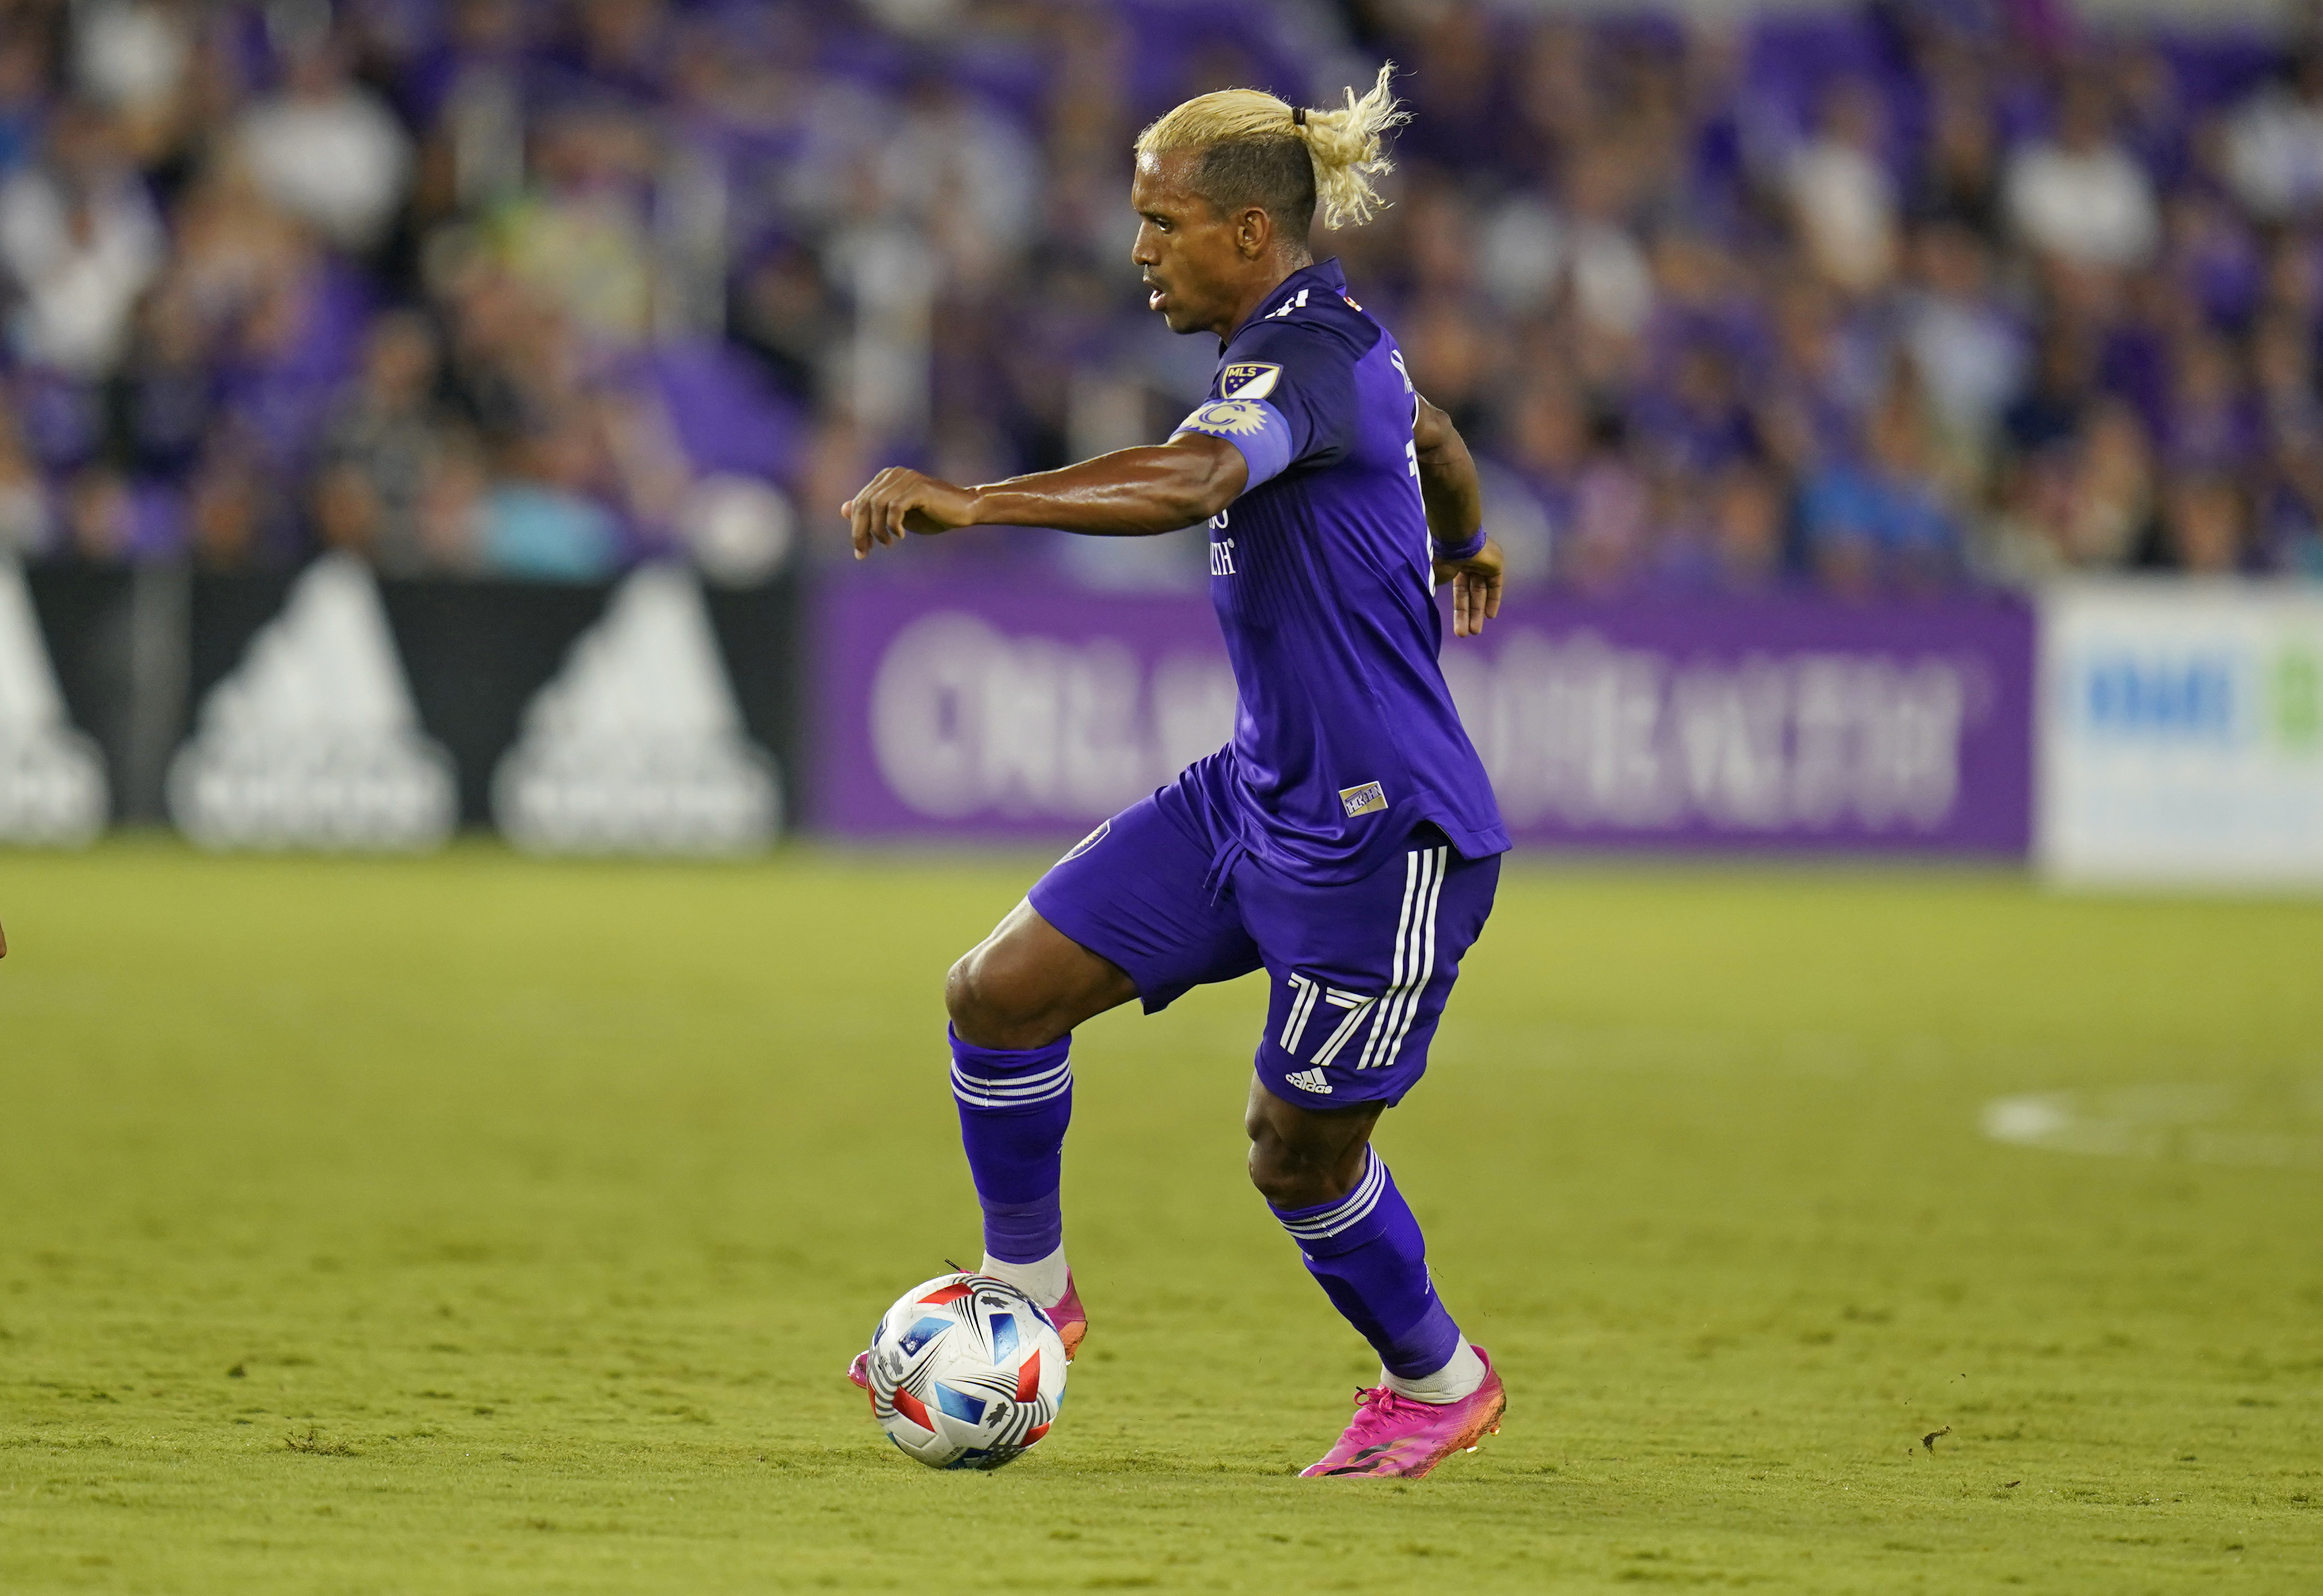 Orlando City's Nani, Pedro Gallese Named to 2021 MLS All-Star Team